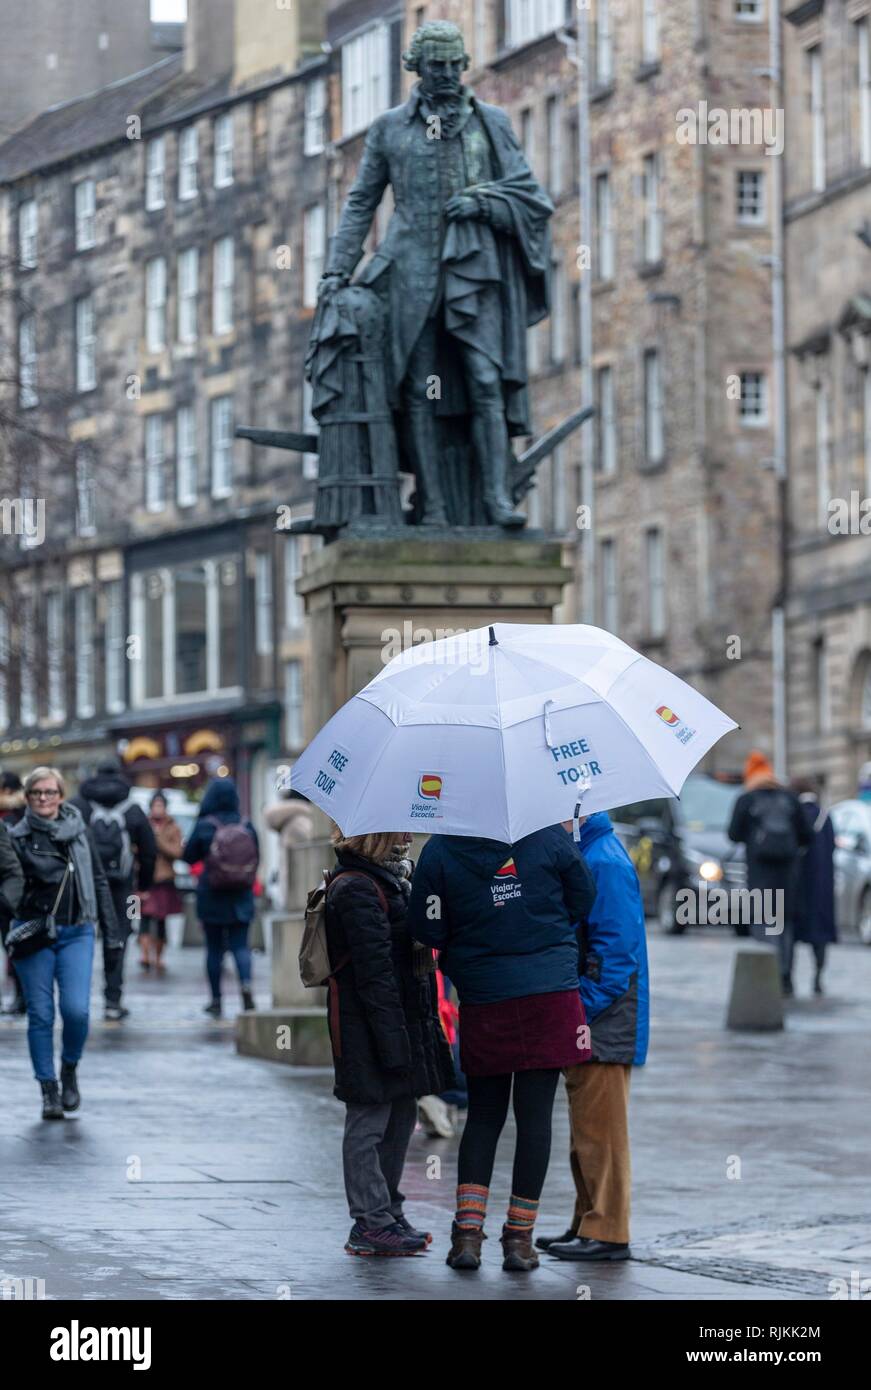 Edinburgh, UK. 07th Feb, 2019. Councillors in Scotland's capital city, Edinburgh, vote on proposals to introduce a tourist tax of £2 per person, per night. The proposals, if approved, will also need legislative change by the Scottish Government which was signalled in the recent Budget. Pictured: One of the many Free Tours sellers on Edinburgh's Royal Mile below a statue of the free-market economist, Adam Smith Credit: Rich Dyson/Alamy Live News Stock Photo